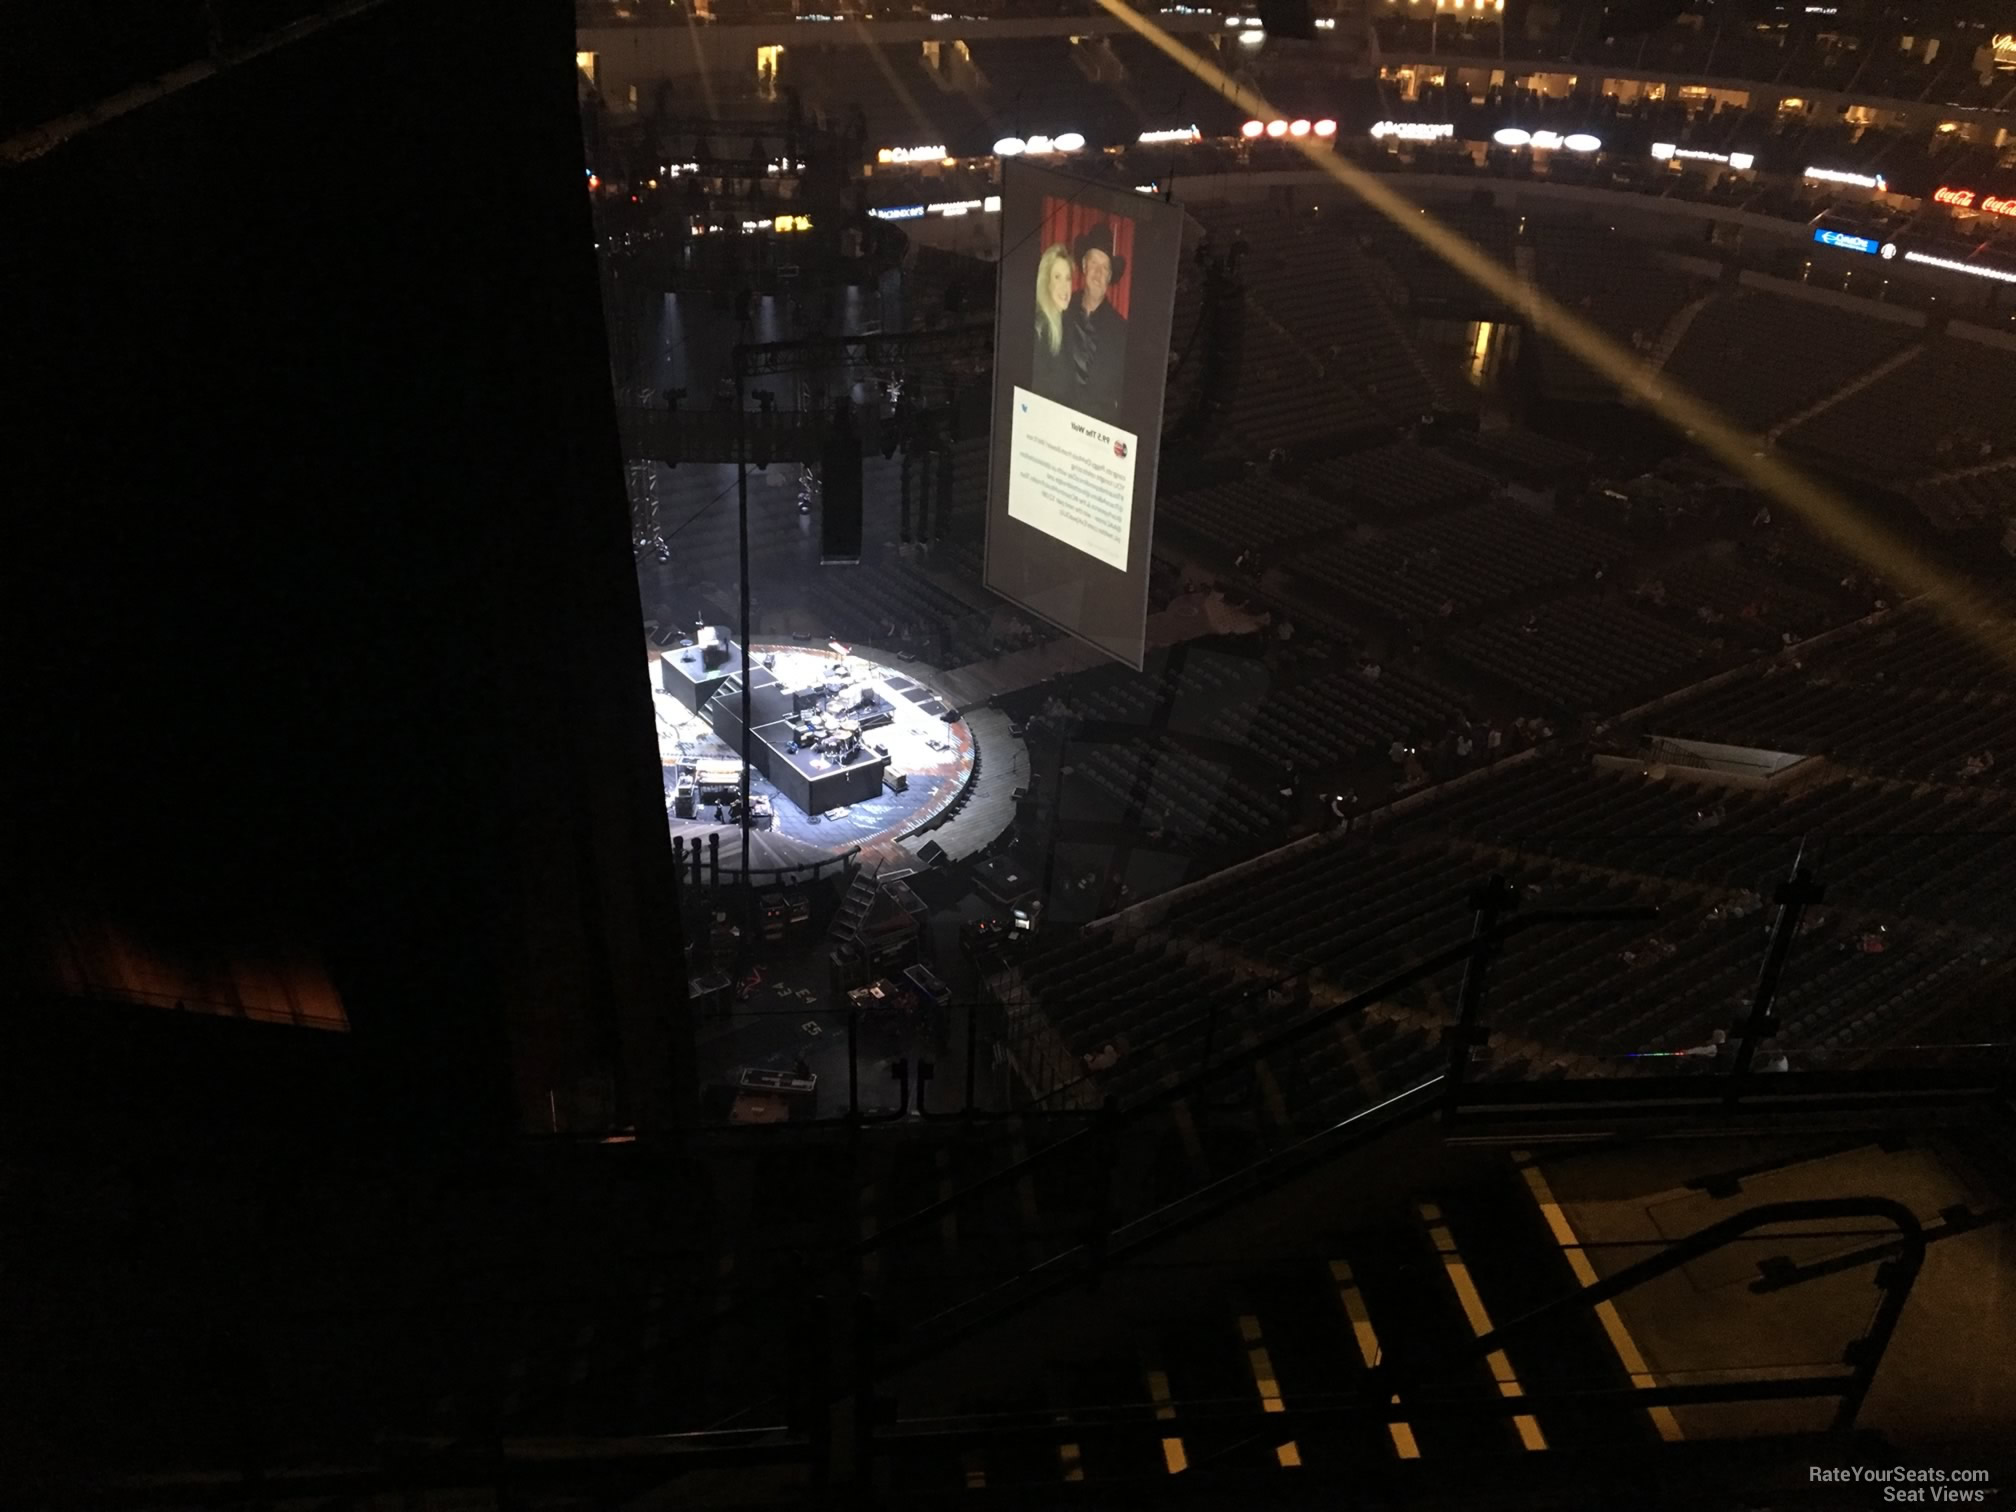 section 331, row k seat view  for concert - american airlines center